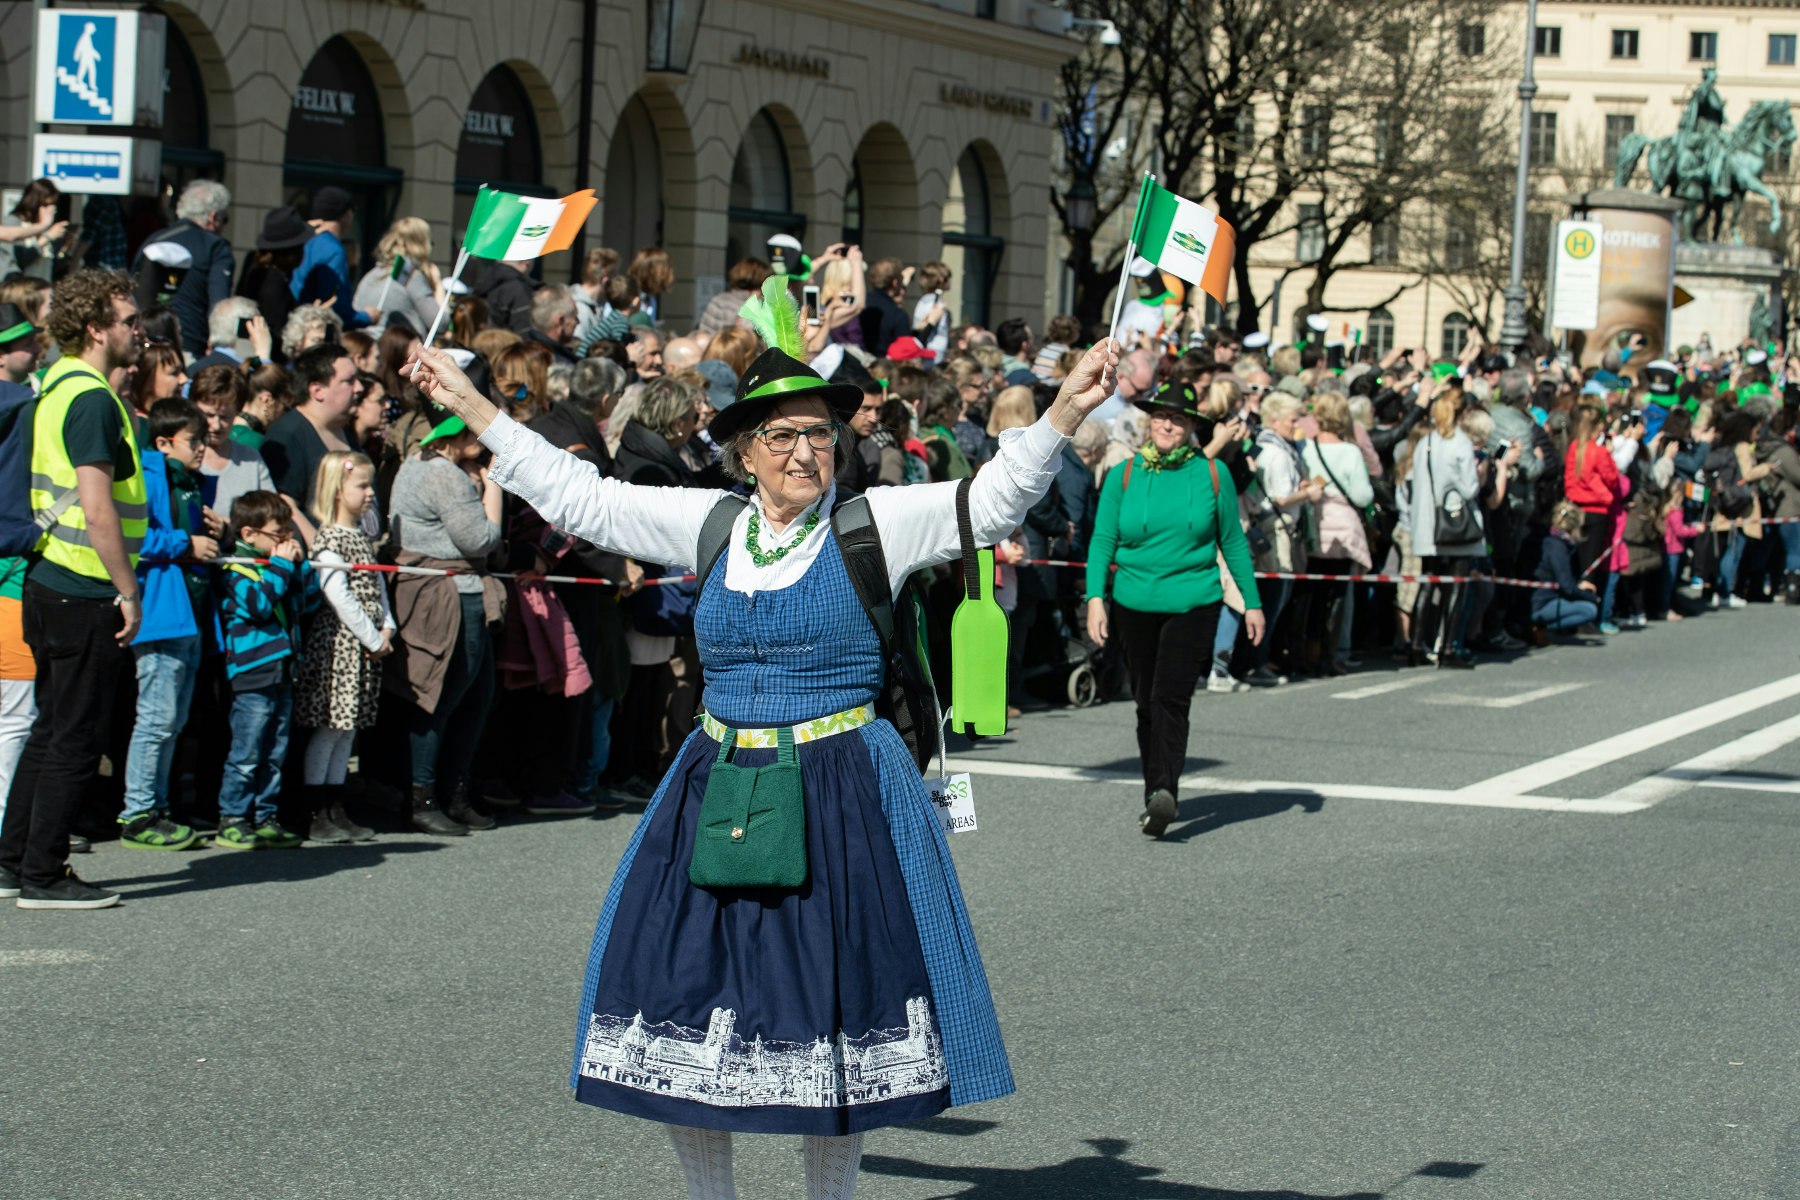 A woman in traditional Bavarian dress walks in Munich's St Patrick's Day parade waving two Irish flags